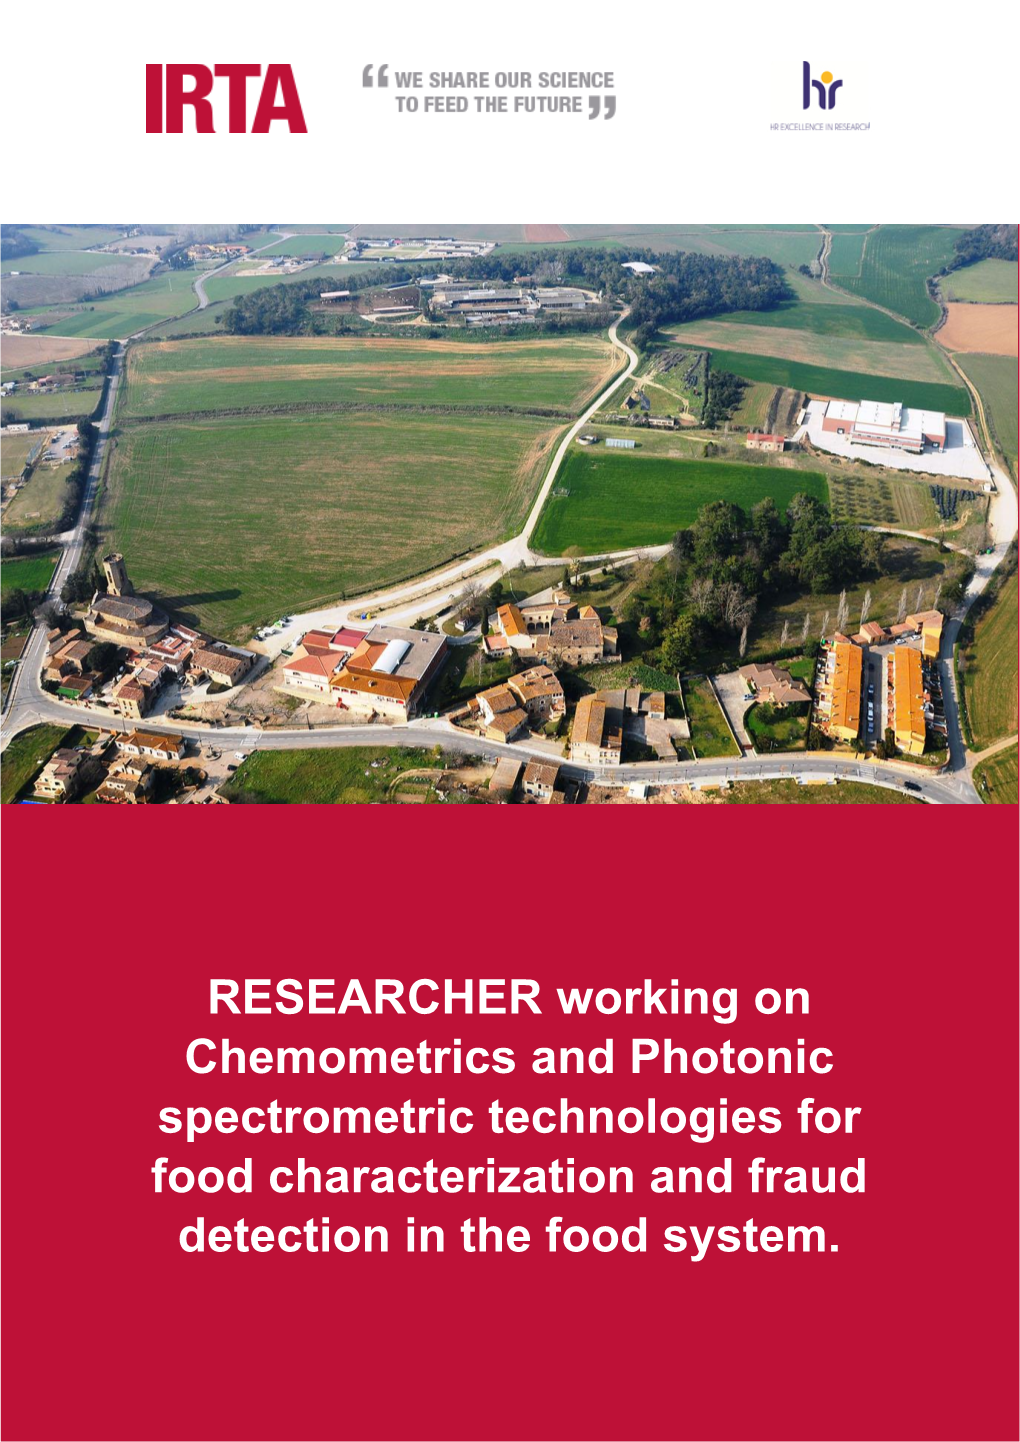 RESEARCHER Working on Chemometrics and Photonic Spectrometric Technologies for Food Characterization and Fraud